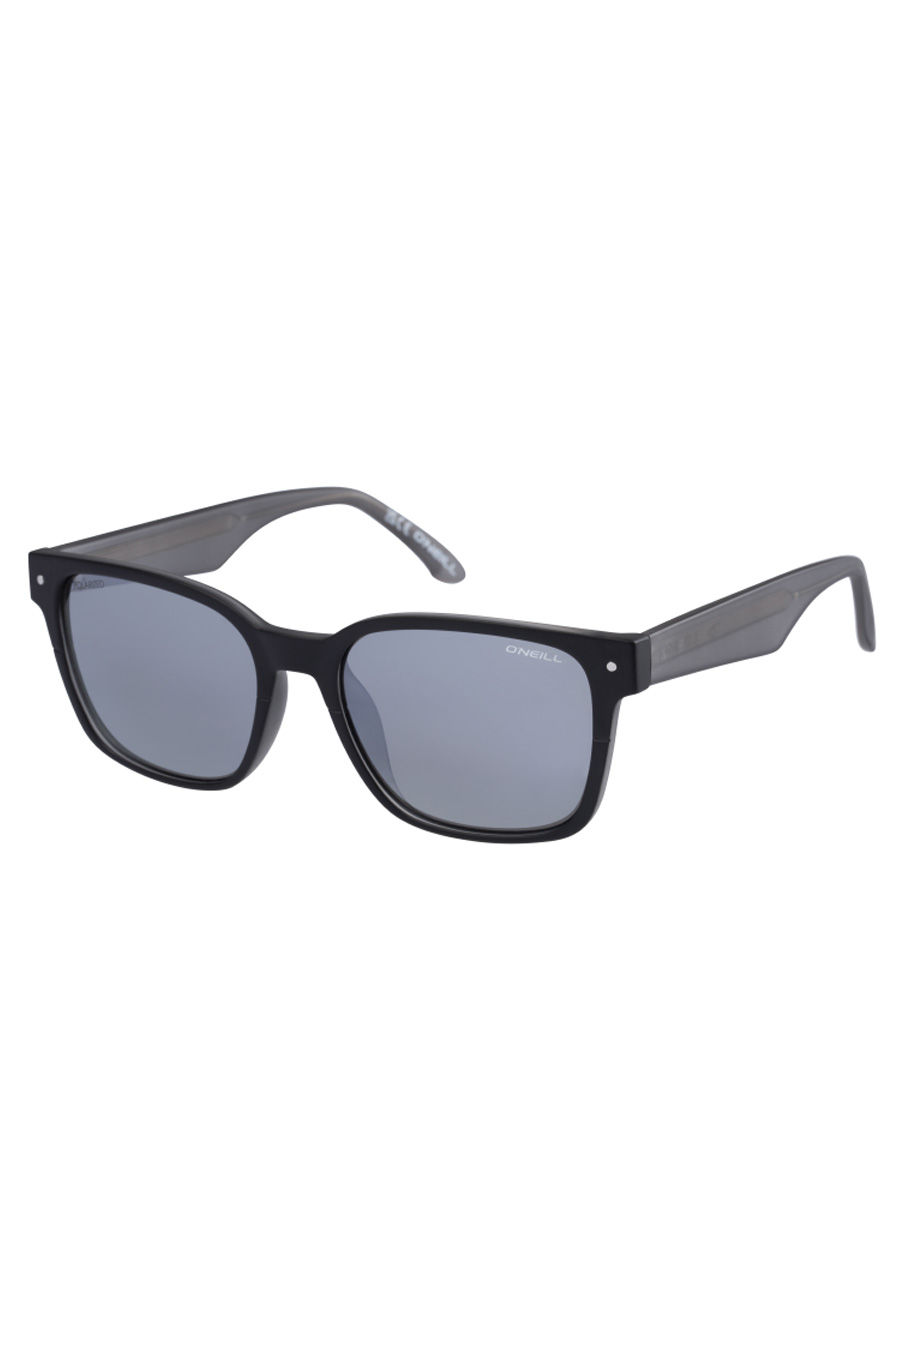 Saulesbrilles ONEILL ONS-9007-20-104P